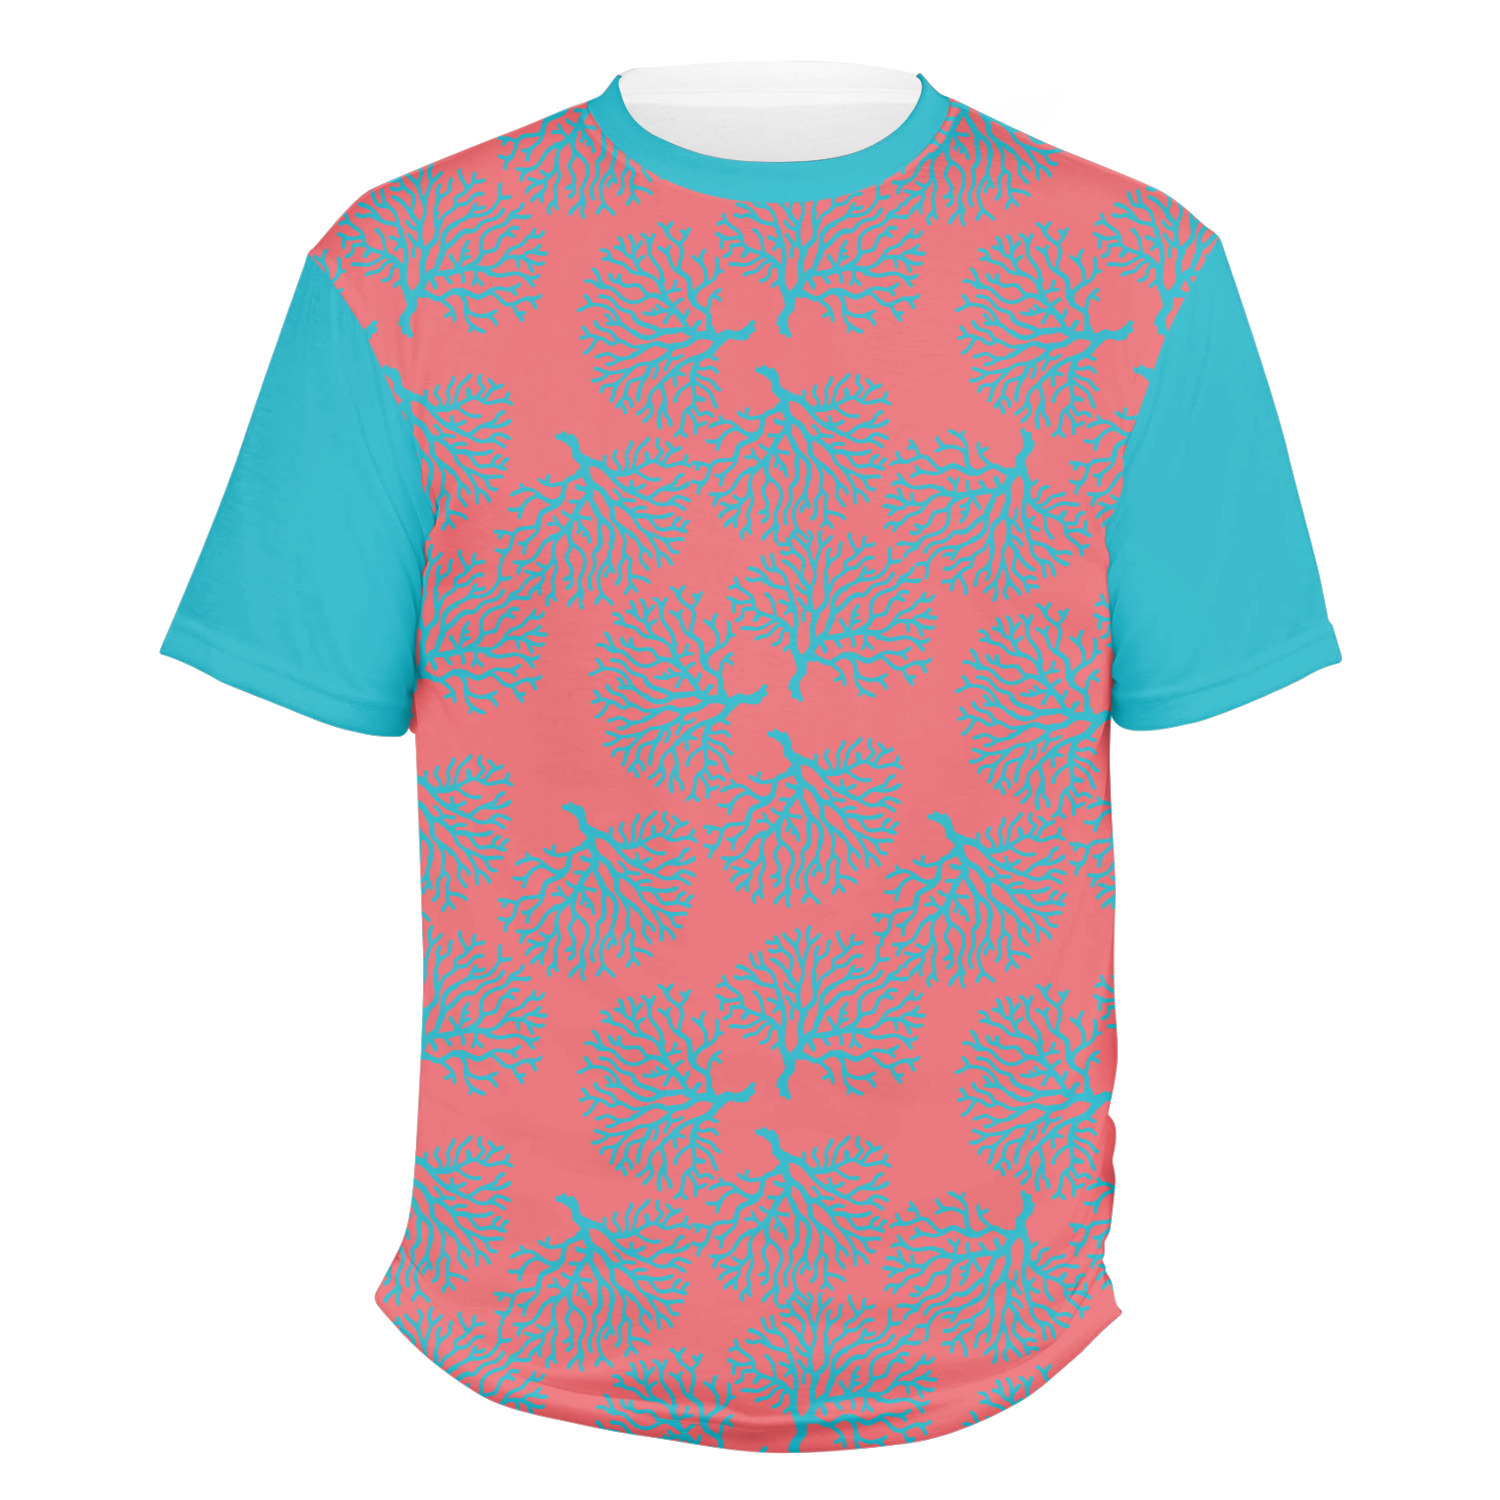 Download Coral & Teal Men's Crew T-Shirt - 3X Large (Personalized) - YouCustomizeIt